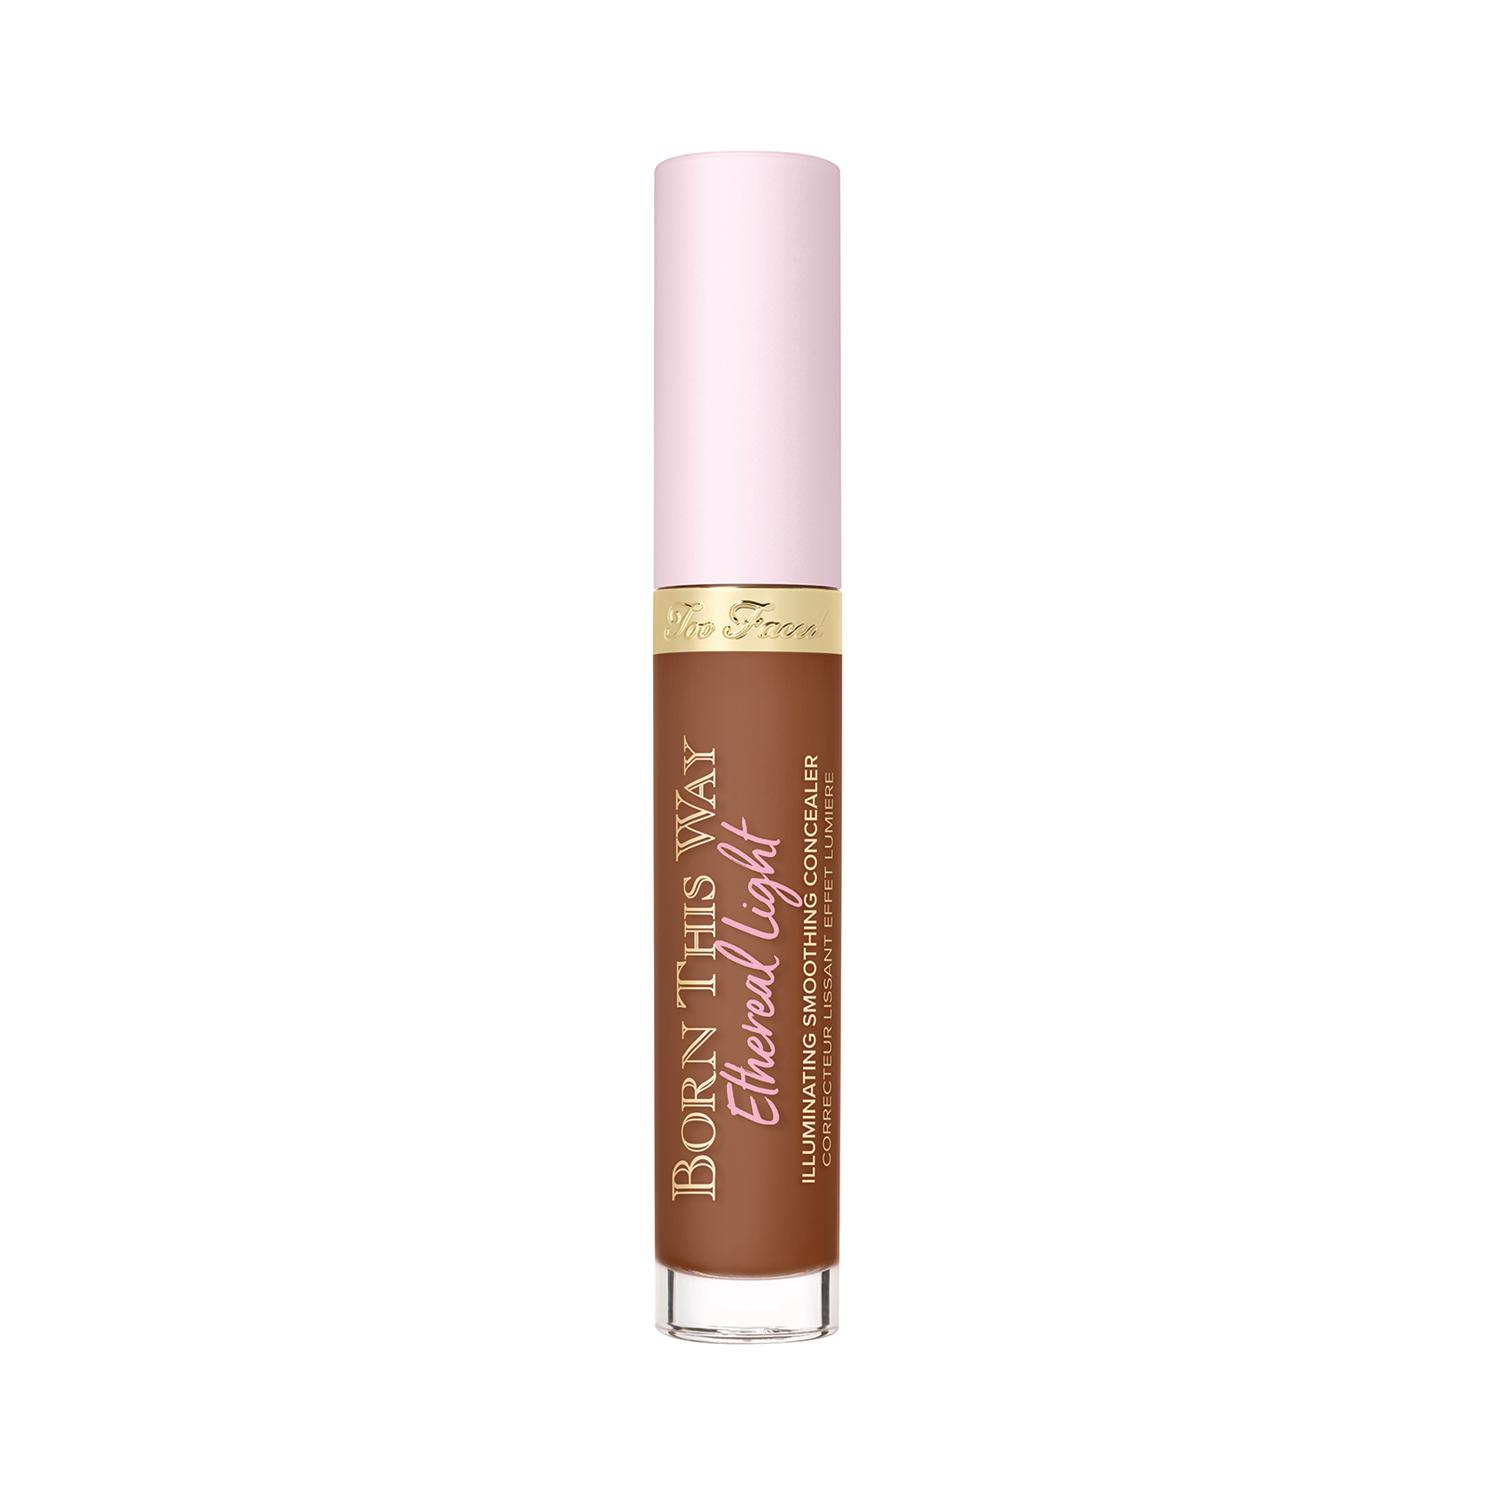 Too Faced | Too Faced Born This Way Illuminating Concealer - Milk Chocolate (5ml)